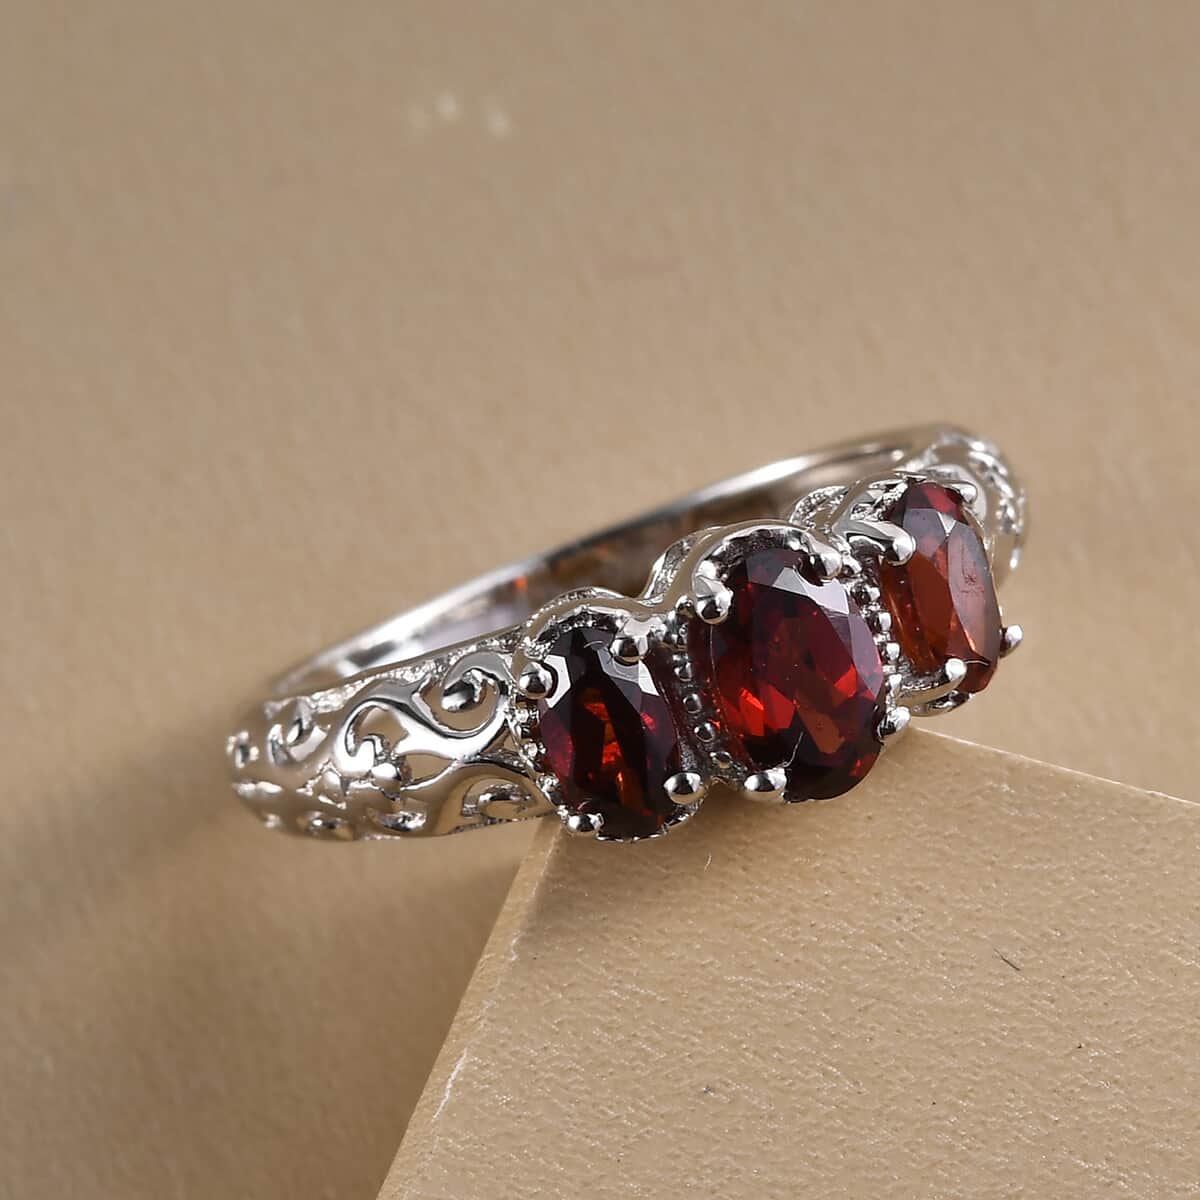 Garnet Ring, 3 Stone Garnet Ring, Trilogy Ring, Sterling Silver Ring, Birthstone Jewelry, Mozambique Garnet 3 Stone Ring 1.15 ctw (Size 6.0) image number 1